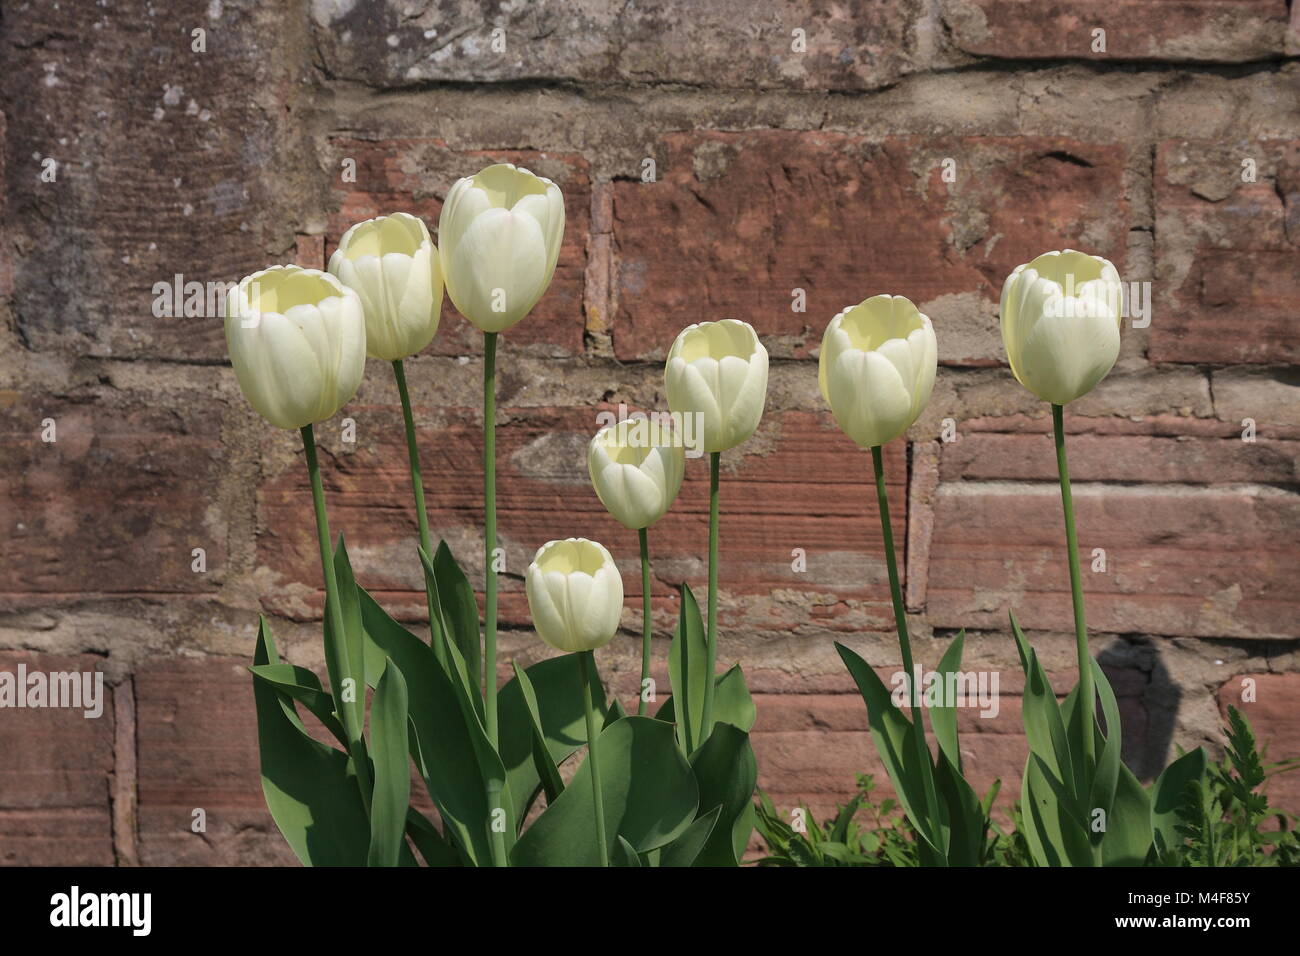 Cream-colored tulips in front of a brick wall Stock Photo